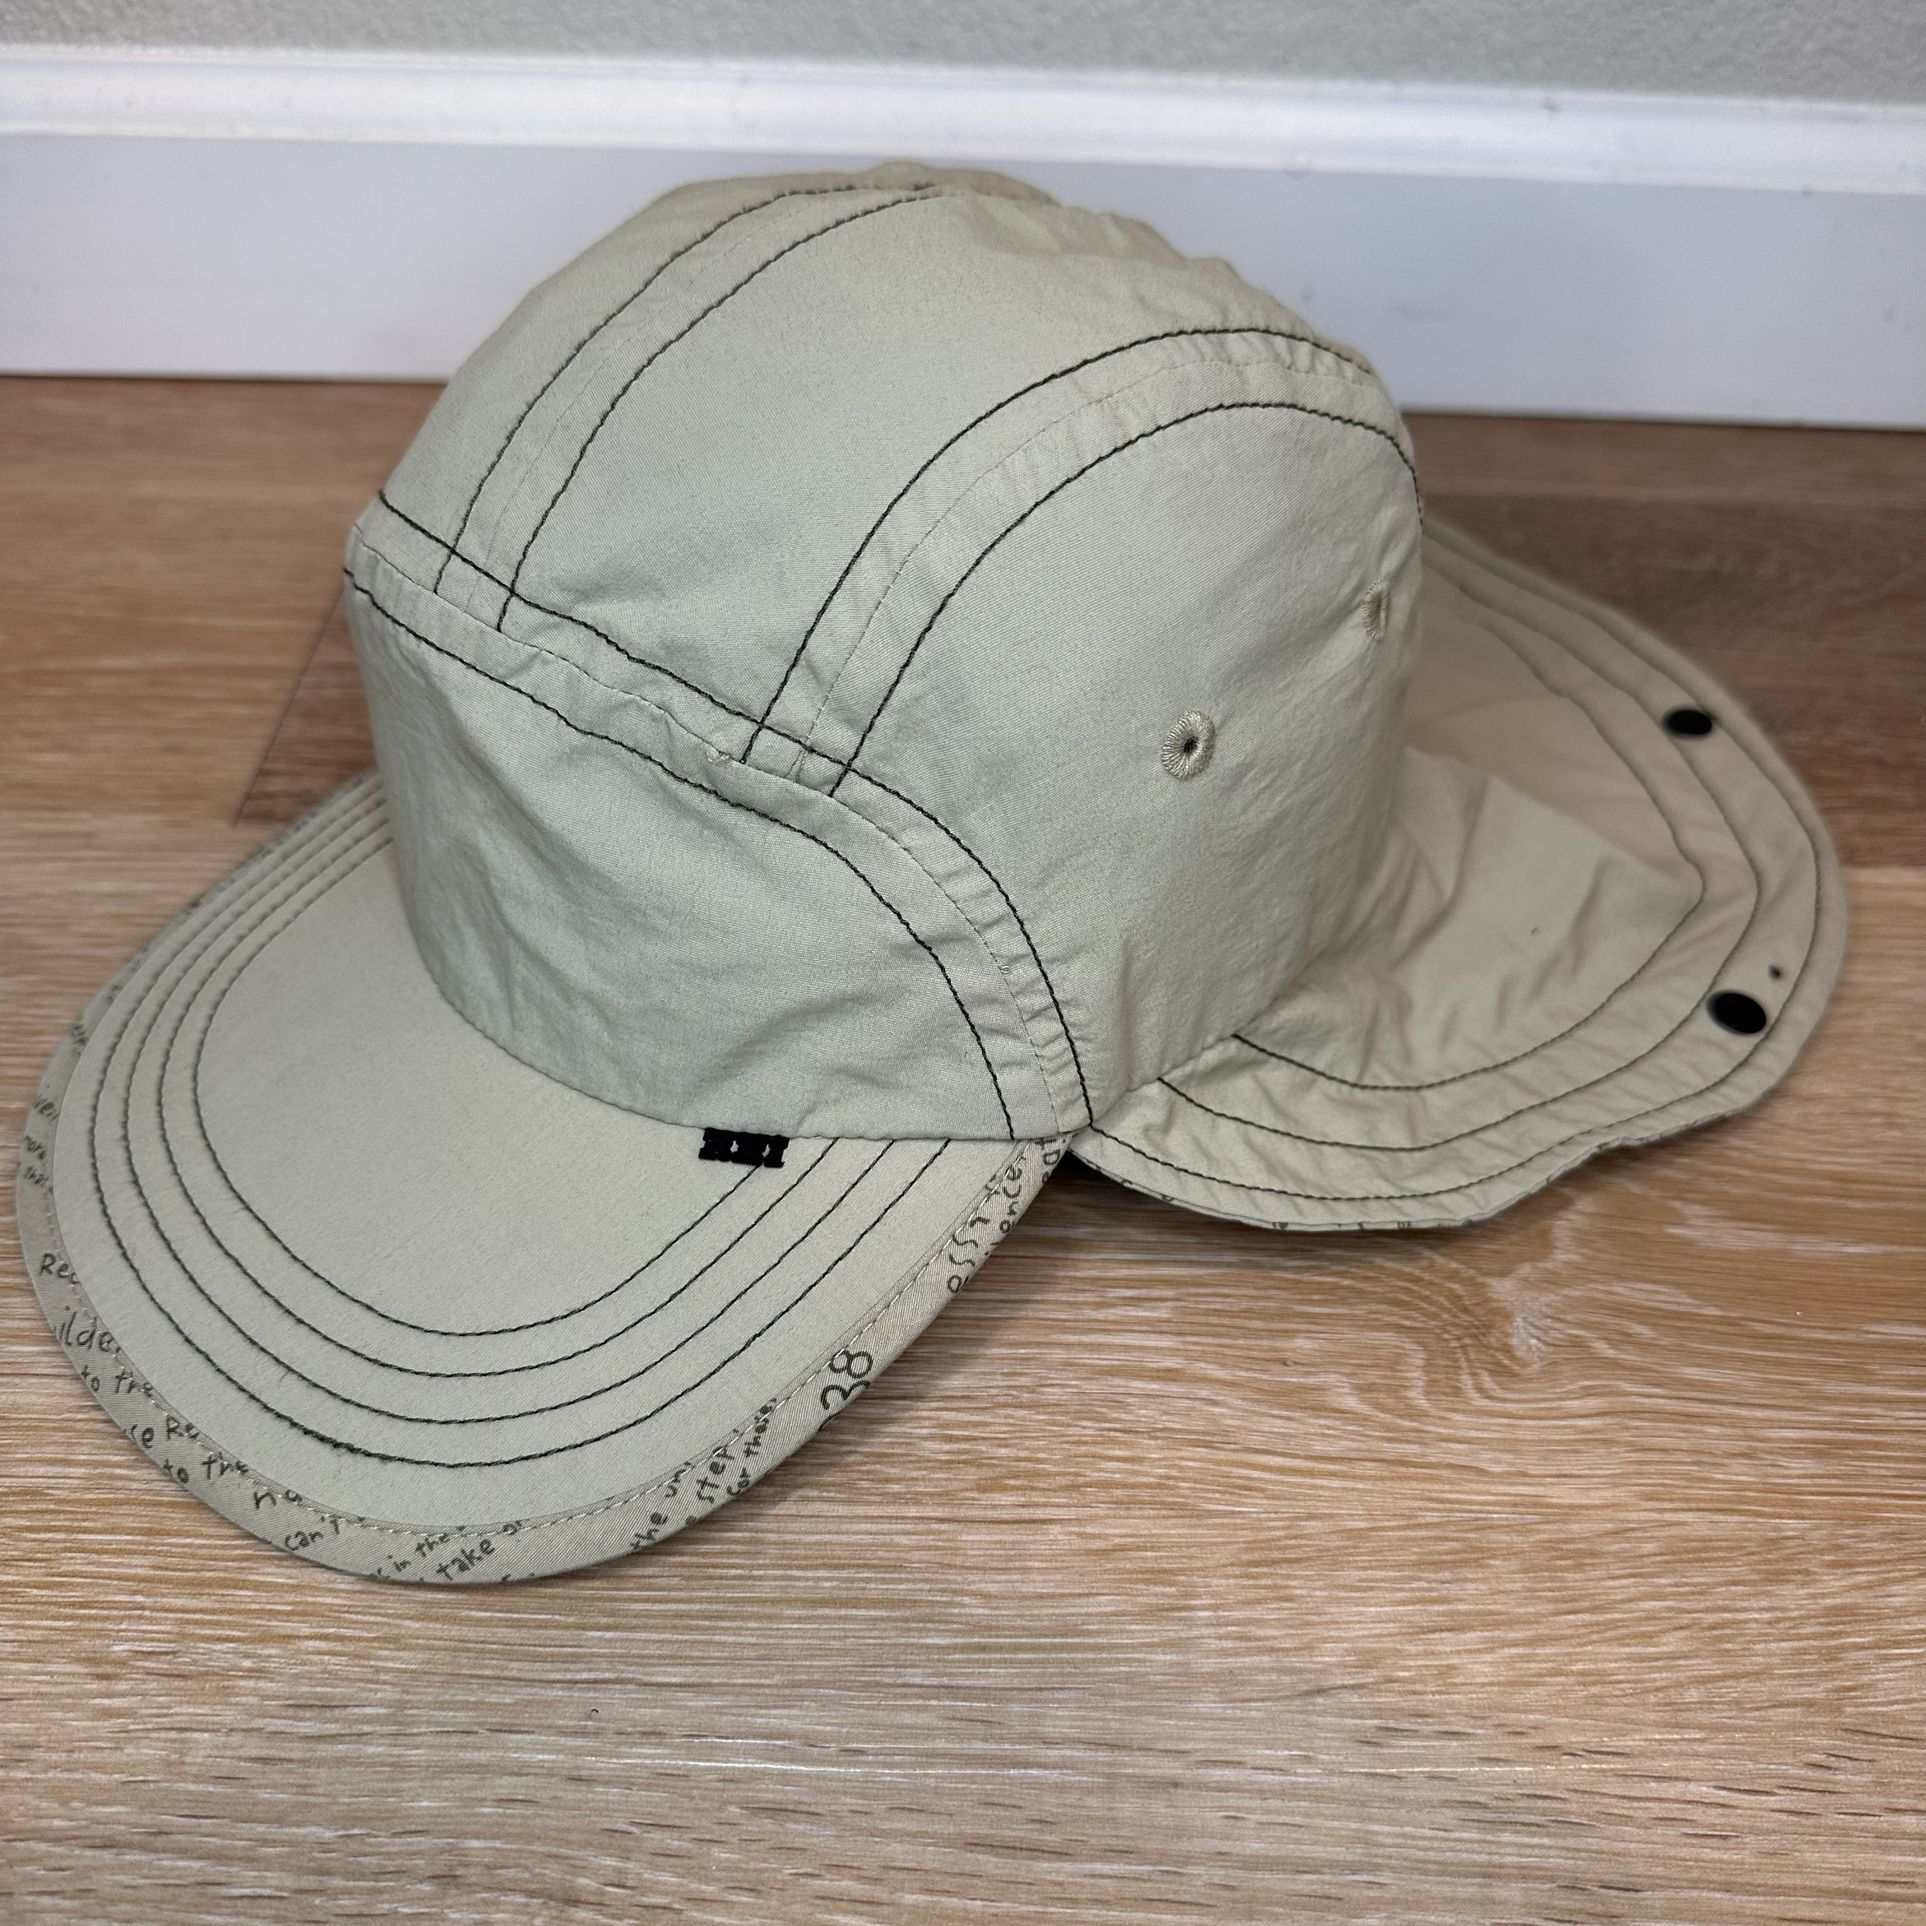 REI Adventure with Cooling Max Neck Cape Hiking Hat